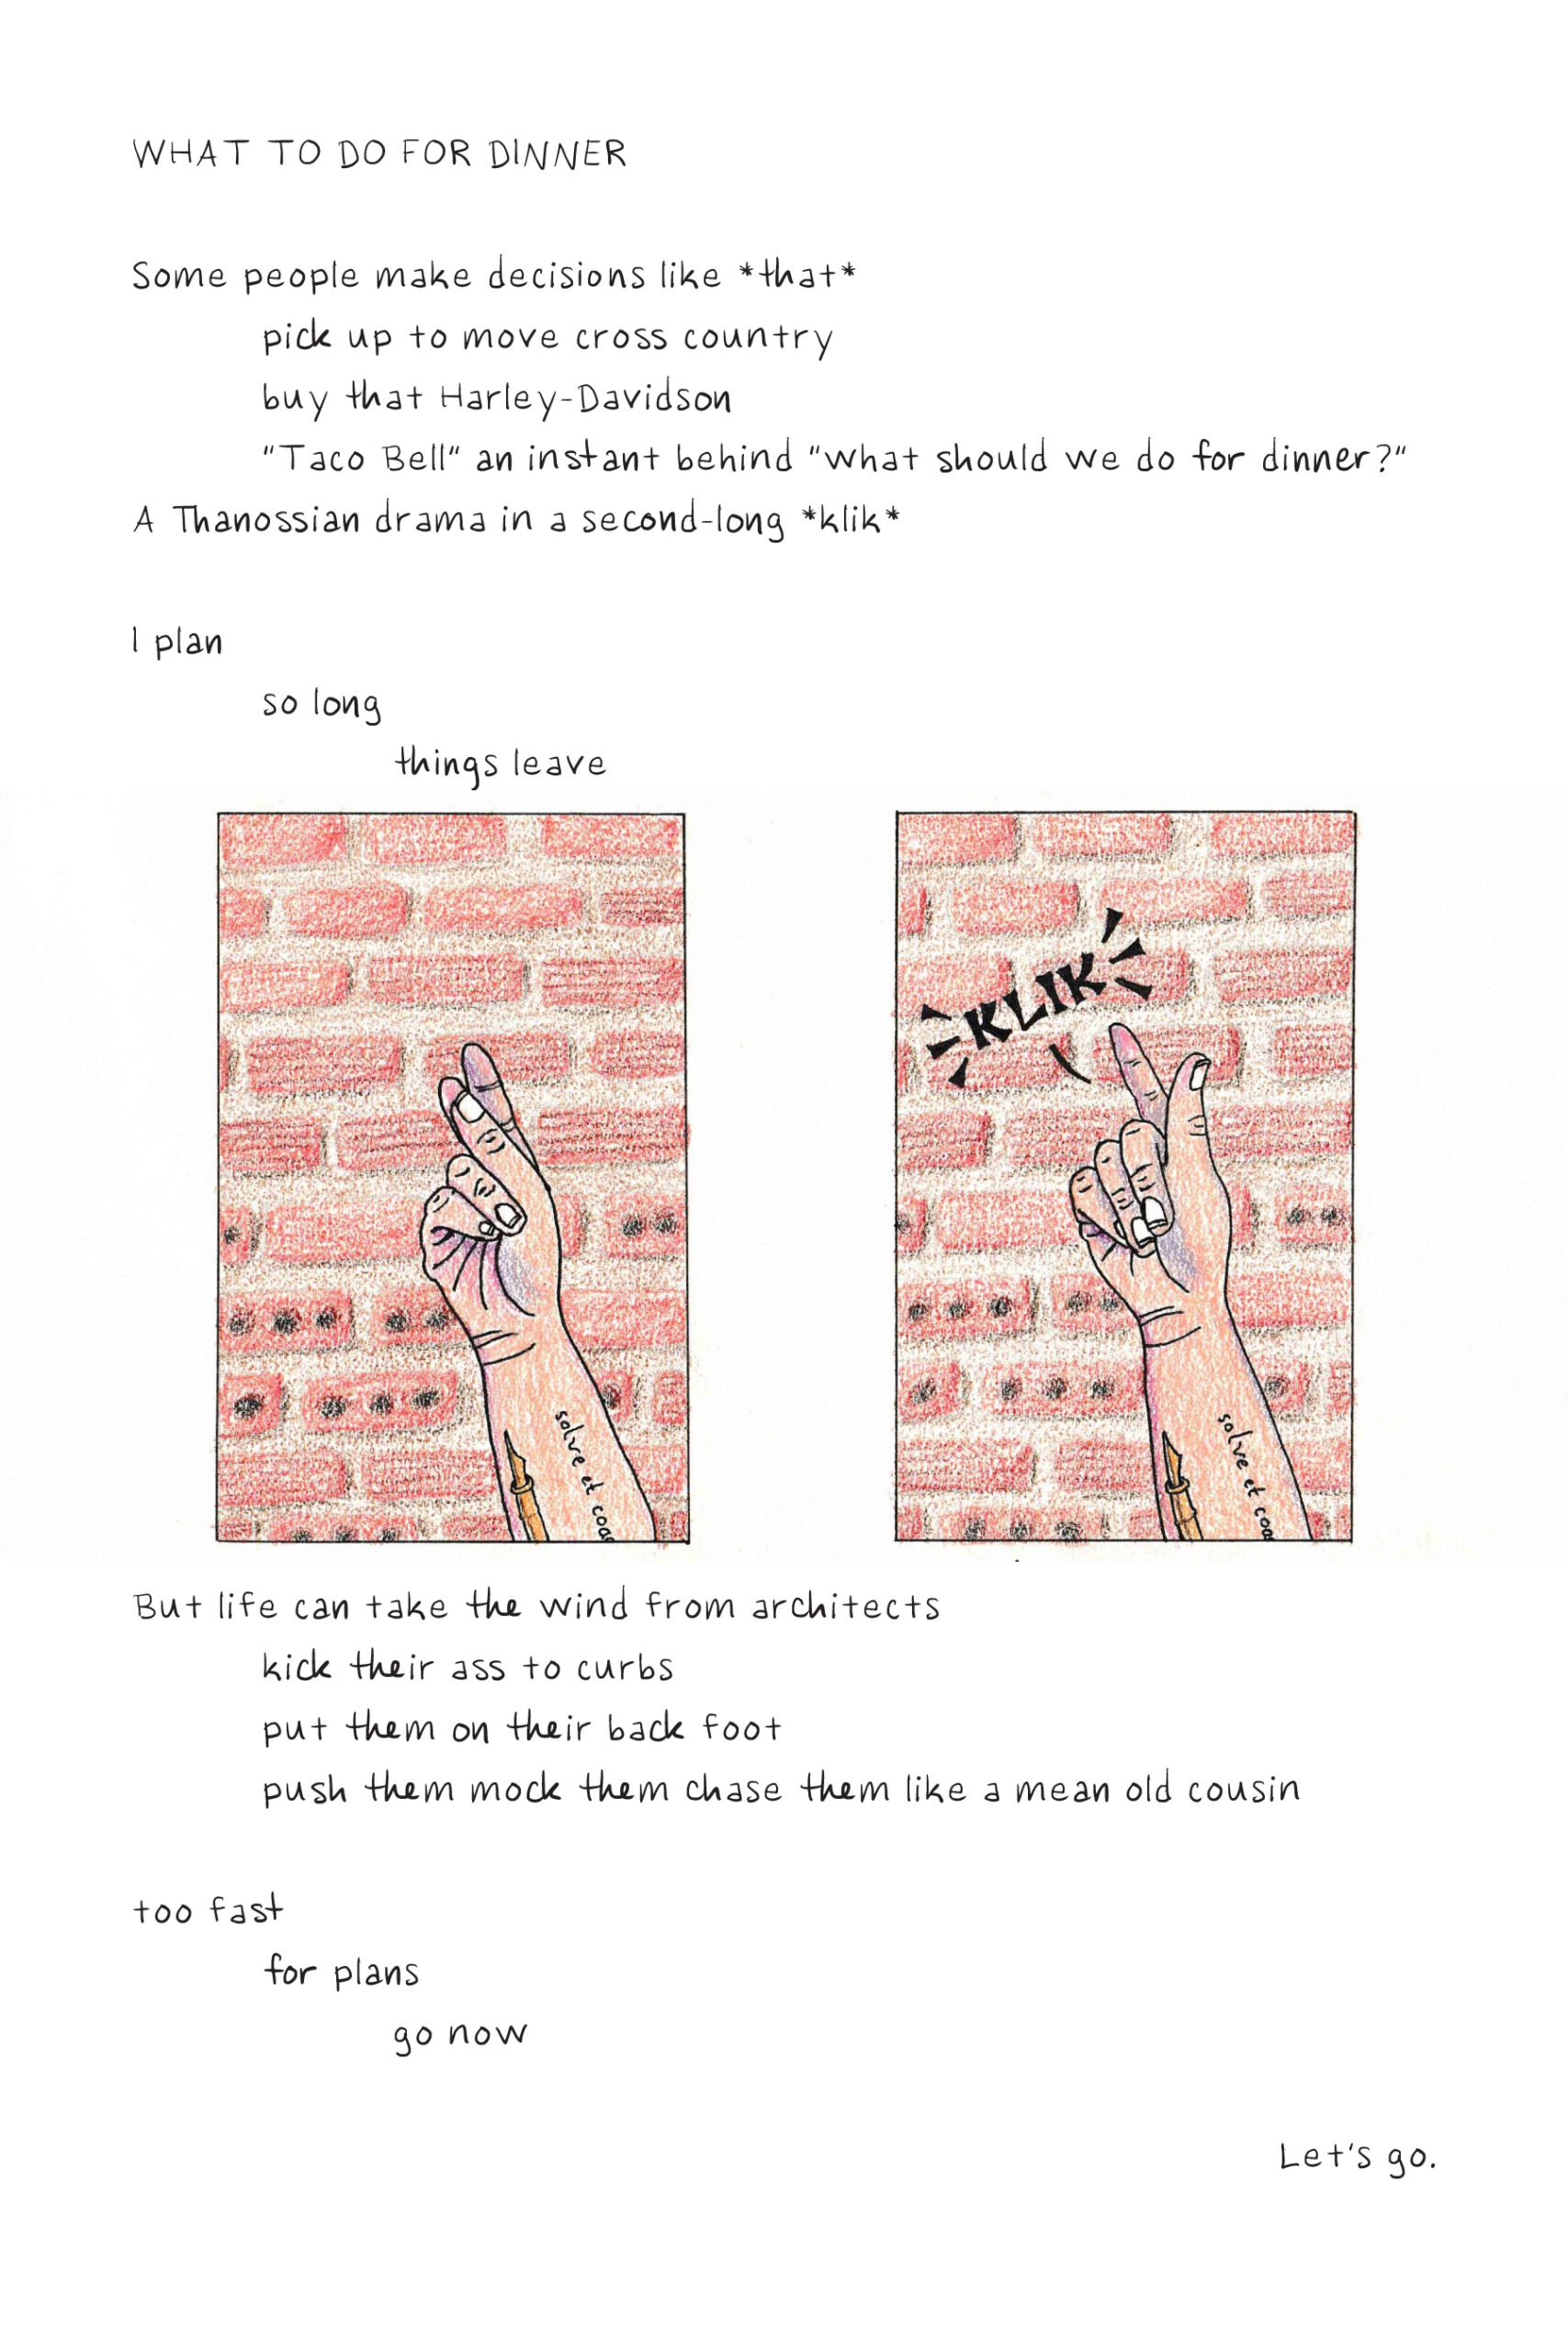 In two frames drawn in colored pencil, a hand is depicted before and after snapping its fingers in front of a red brick wall. The accompanying poem reads: "Some people make decisions like *that.* Pick up to move cross country. Buy that Harley Davidson. 'Taco Bell' and instant behind 'what should we do for dinner?' A Thanossian drama in a second-long *klik.* I plan so long things leave. But life can take the wind from architects. Kick their ass to curbs. Put them on their back foot. Push them mock them chase them like a mean old cousin. Too fast for plans, go now. Let's go."